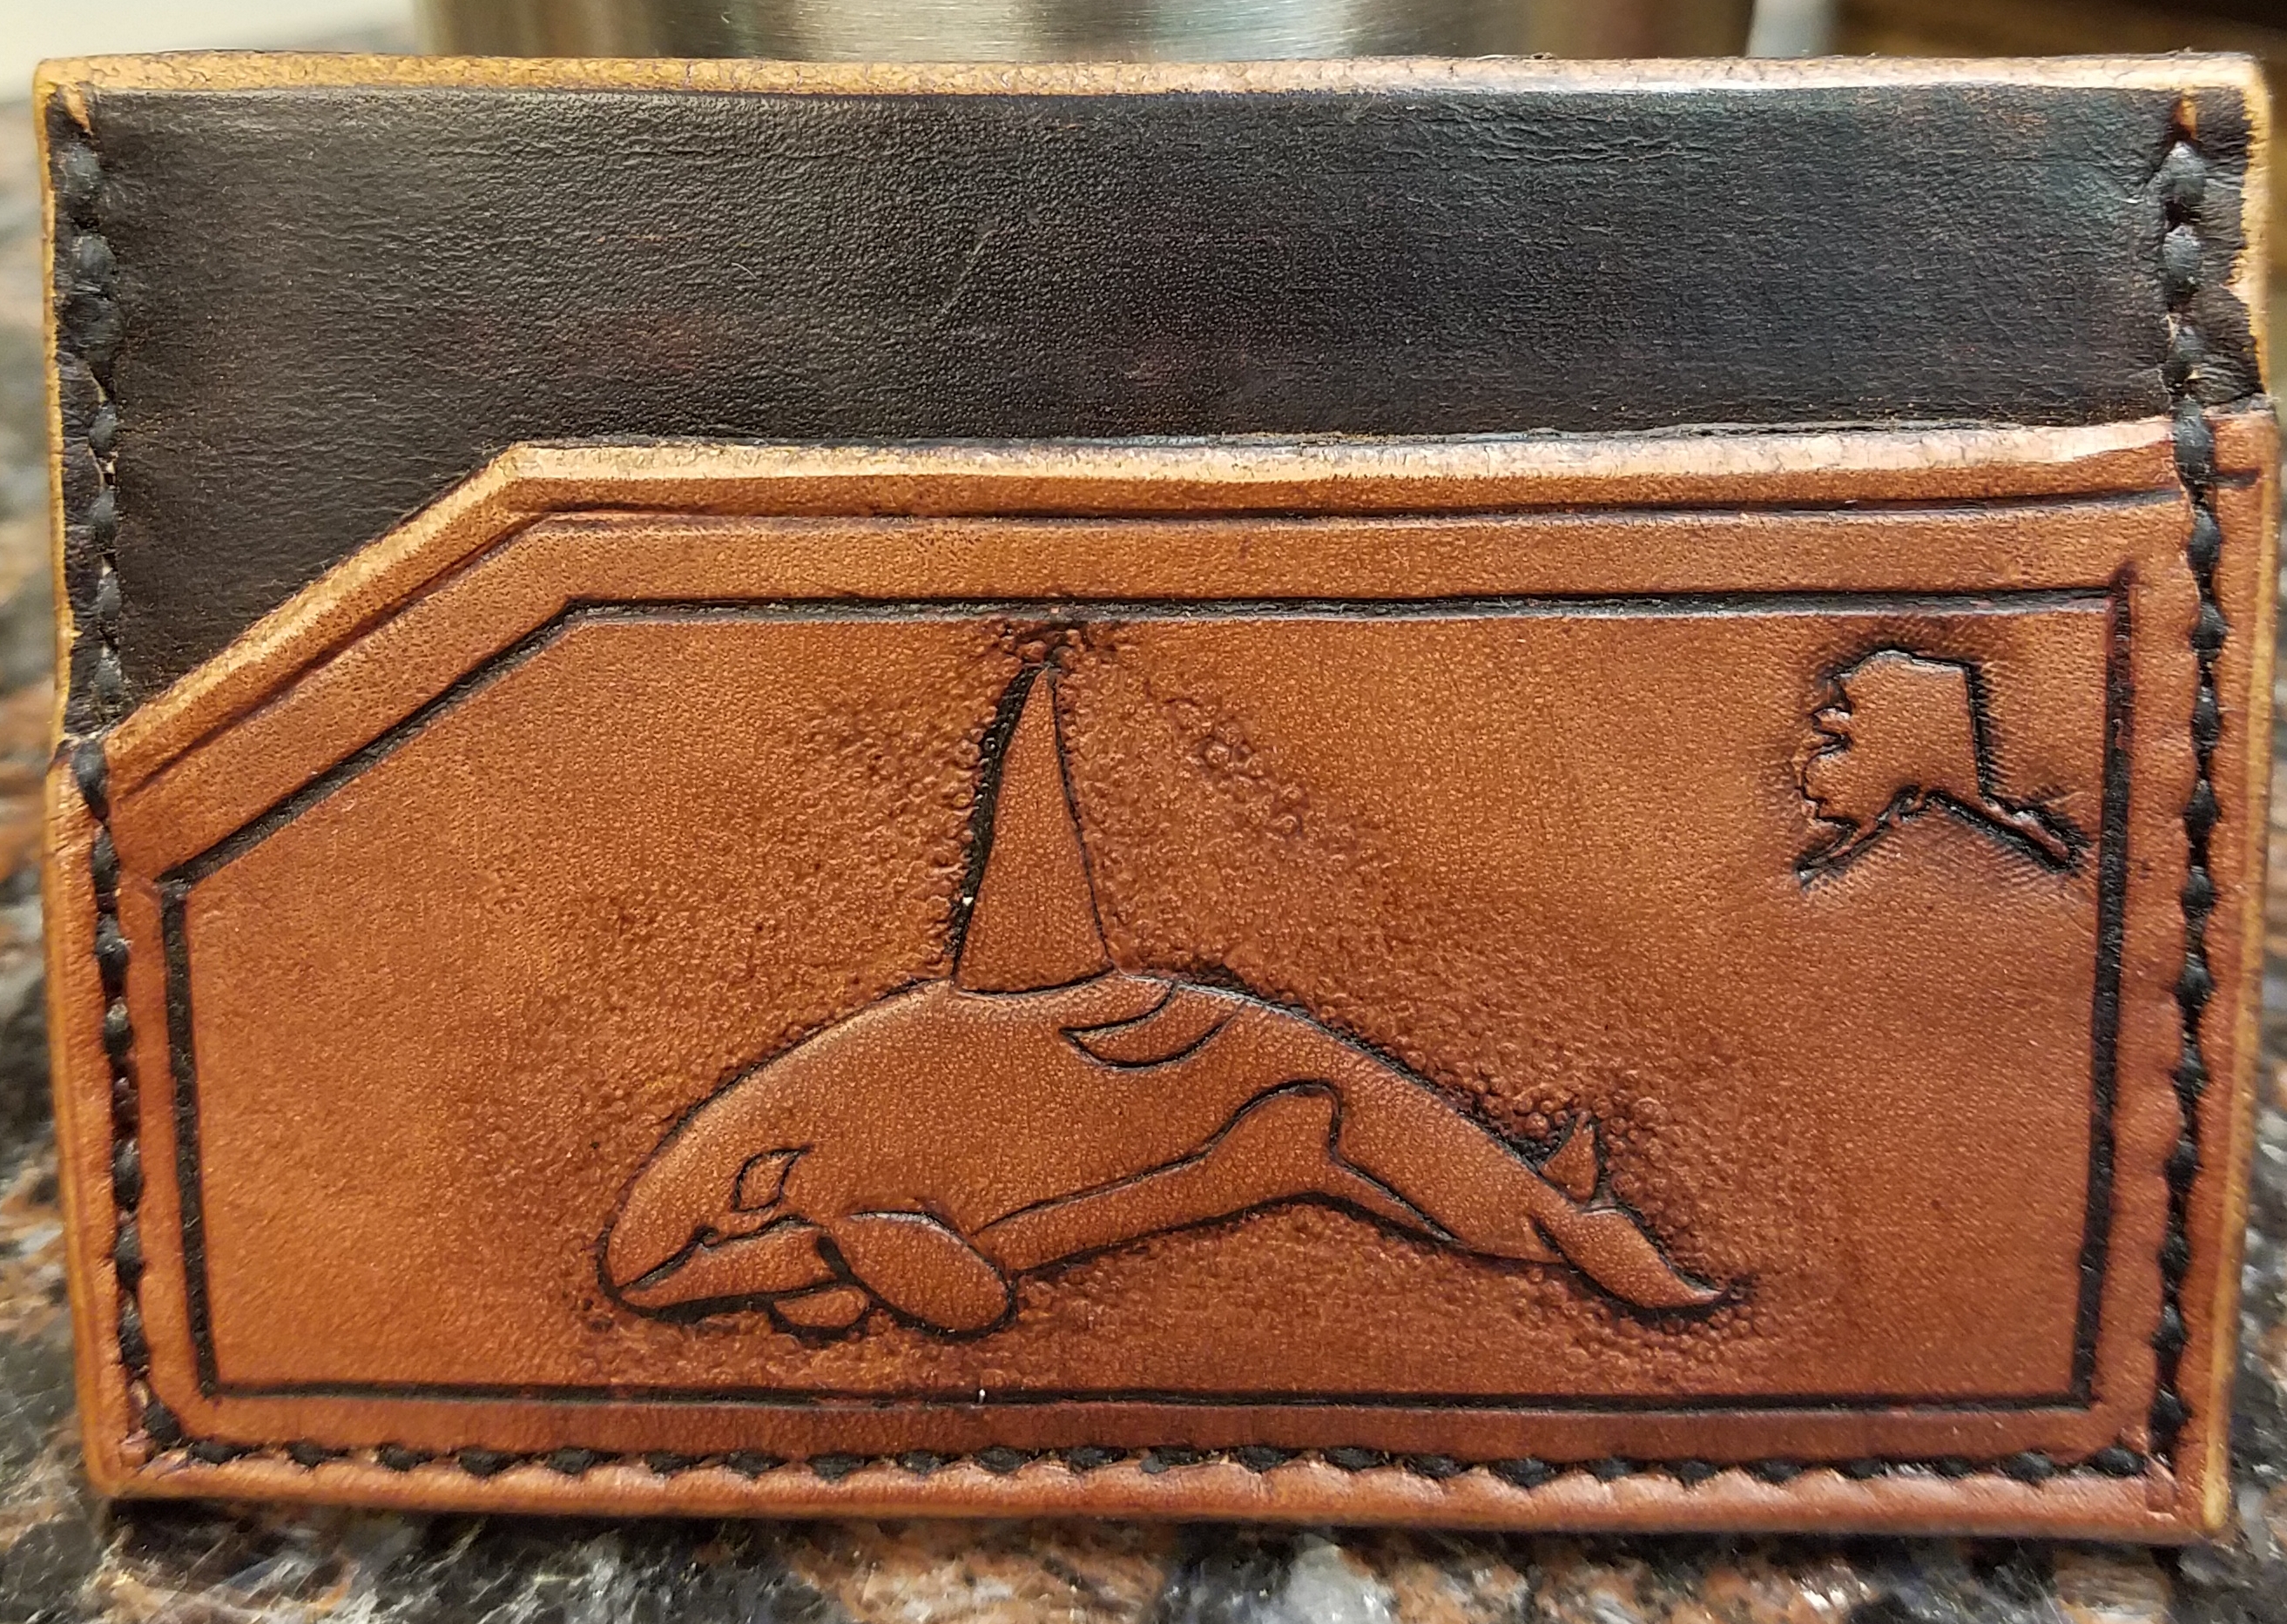 Killer whale, 3 pocket minimalist wallet, hand tooled and hand stitched,  $65.00